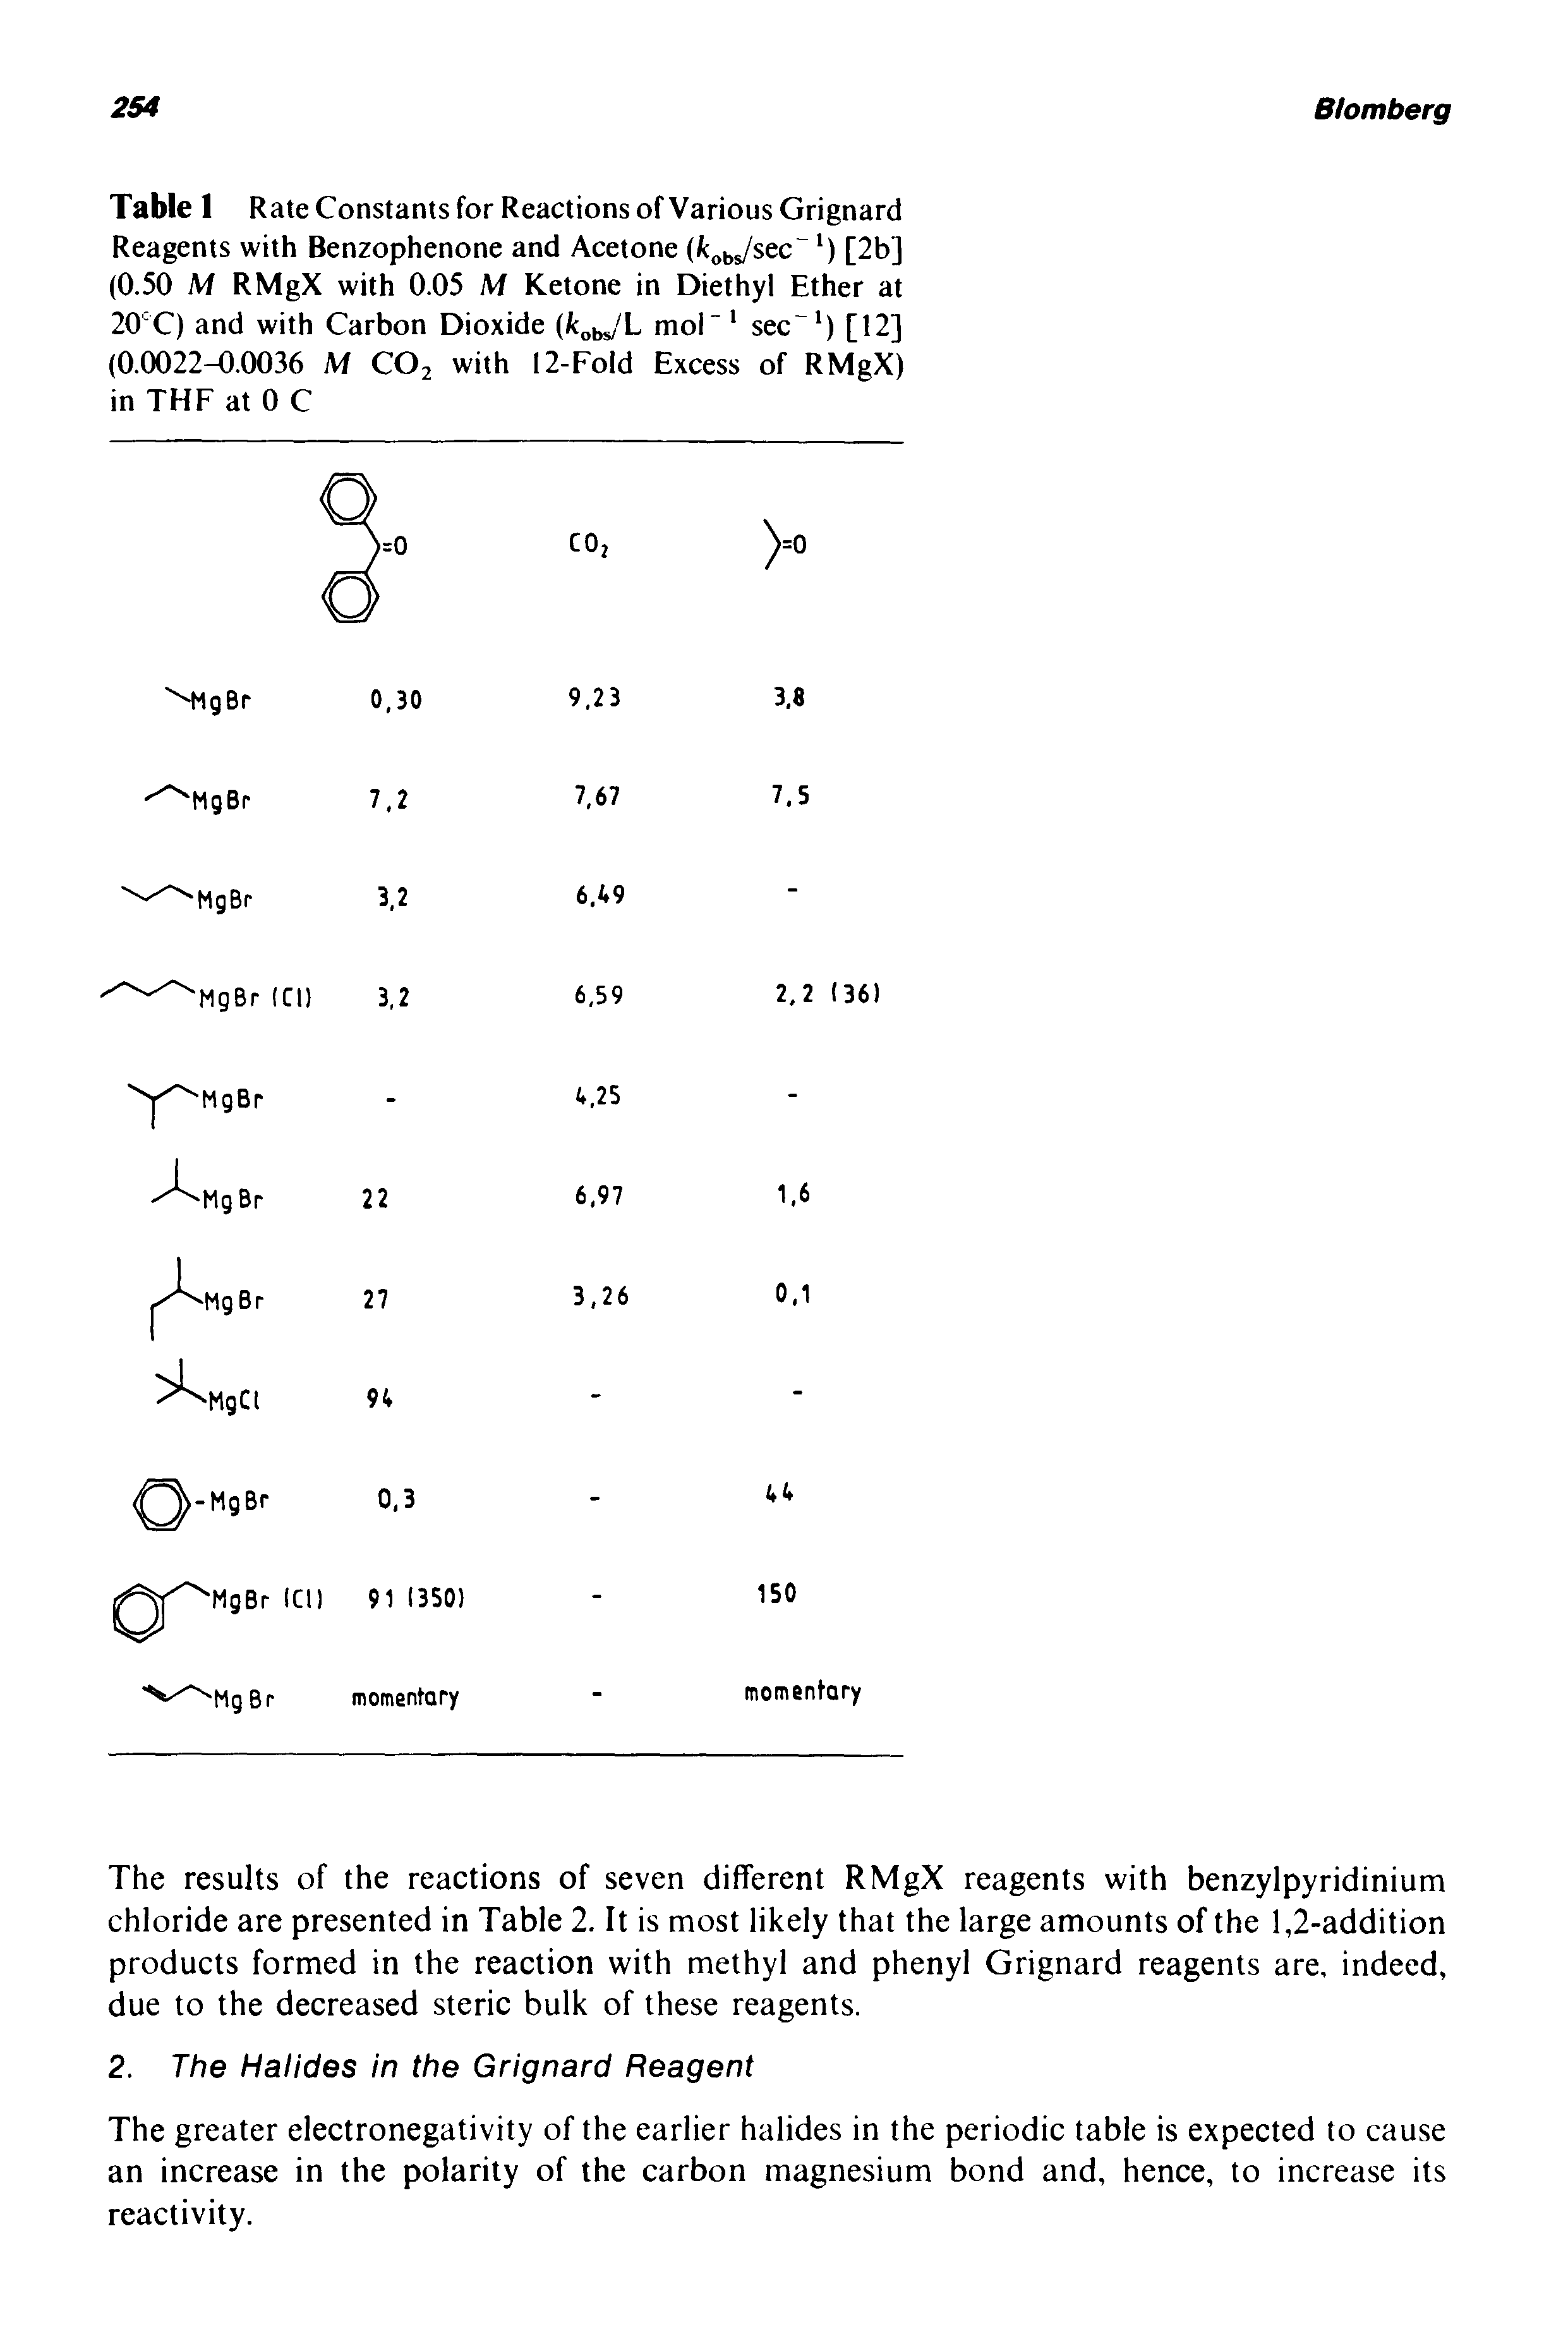 Table 1 Rate Constants for Reactions of Various Grignard Reagents with Benzophenone and Acetone (fcobs/sec ) [2b] (0.50 M RMgX with 0.05 M Ketone in Diethyl Ether at 20 C) and with Carbon Dioxide mol sec ) [12]...